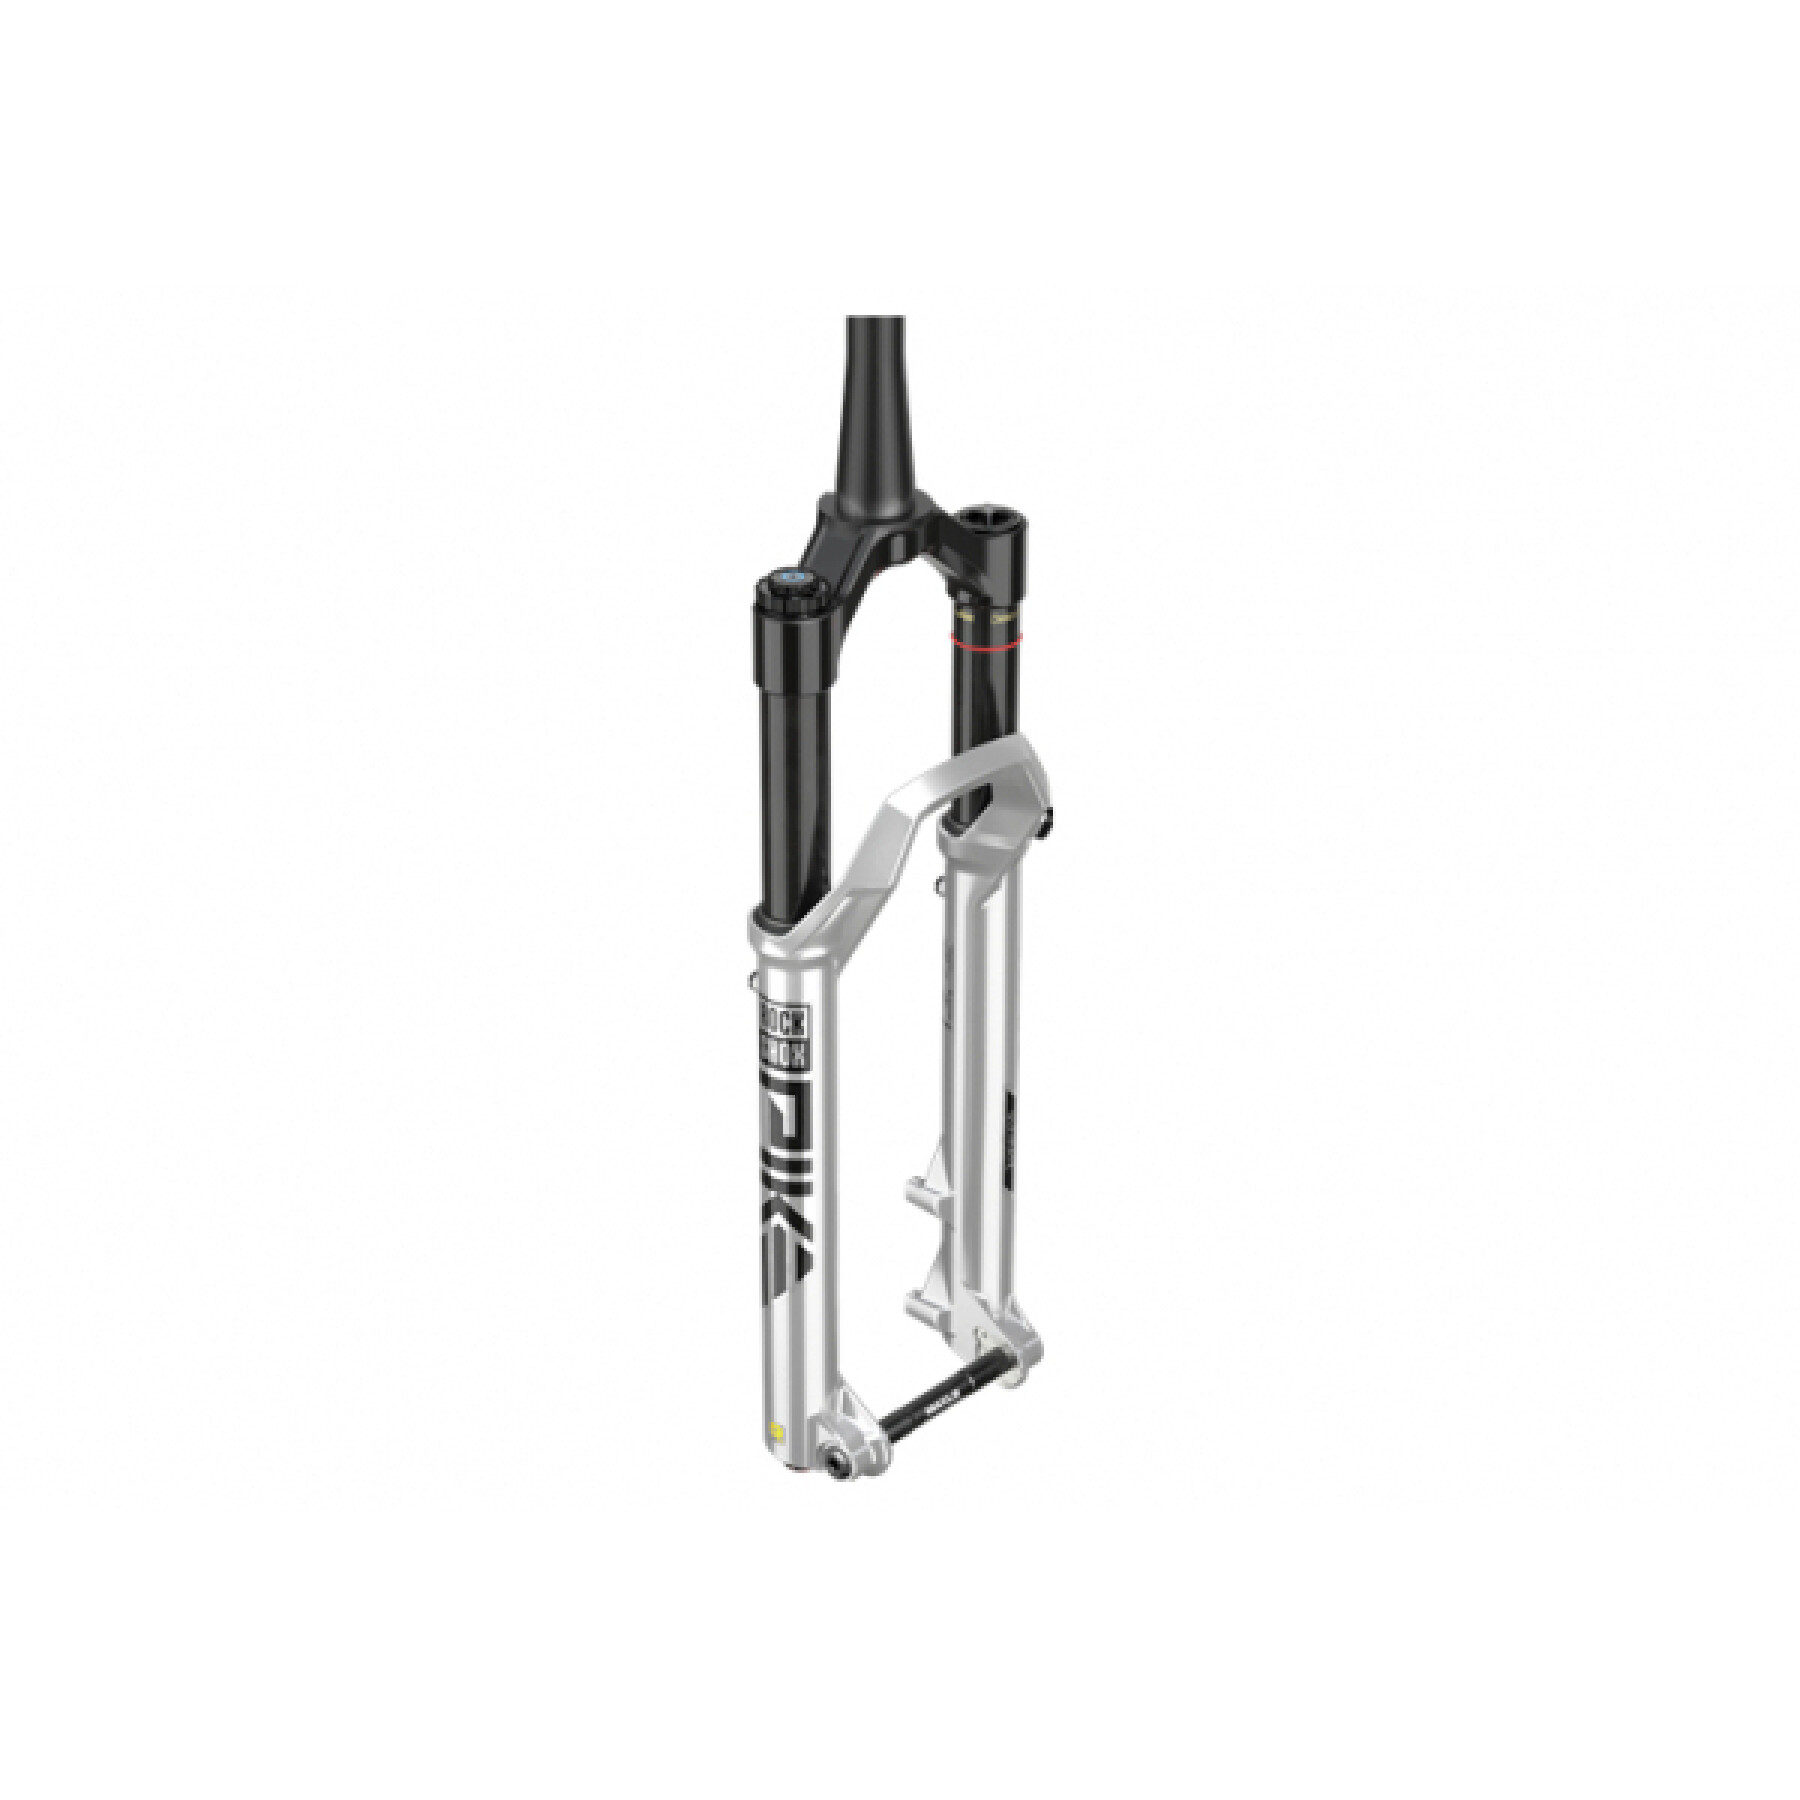 Horquilla Rockshox Pike Ultimate Charger 3 Rc2 27.5 Os44 C1